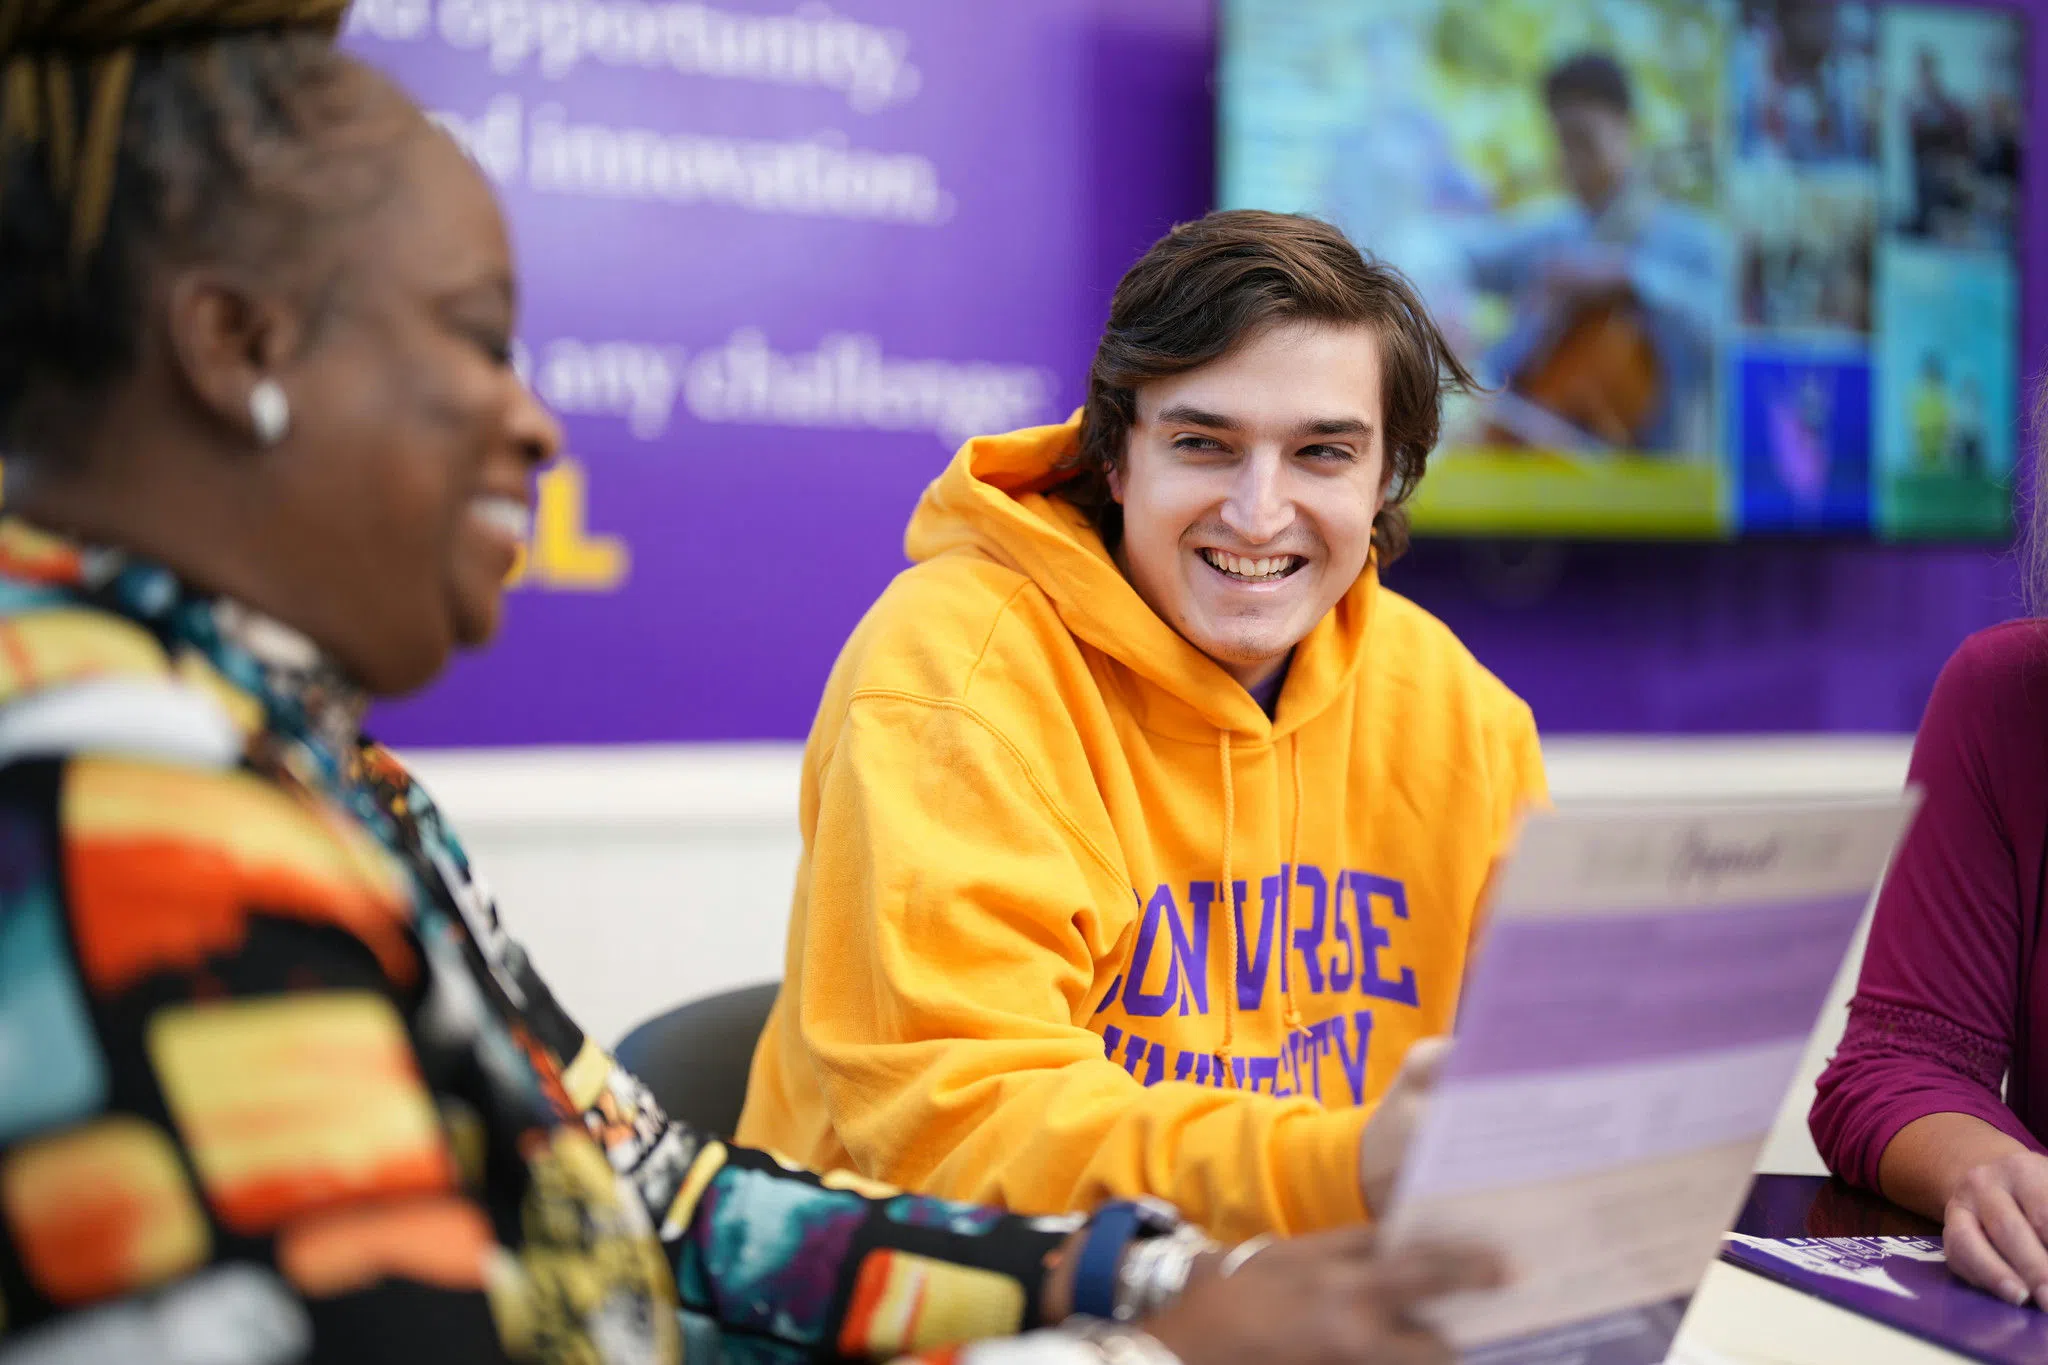 A young man in a bright yellow-orange sweatshirt smiles as a woman on the left edge of the photo in a colorful top holds out a paper in front of him.